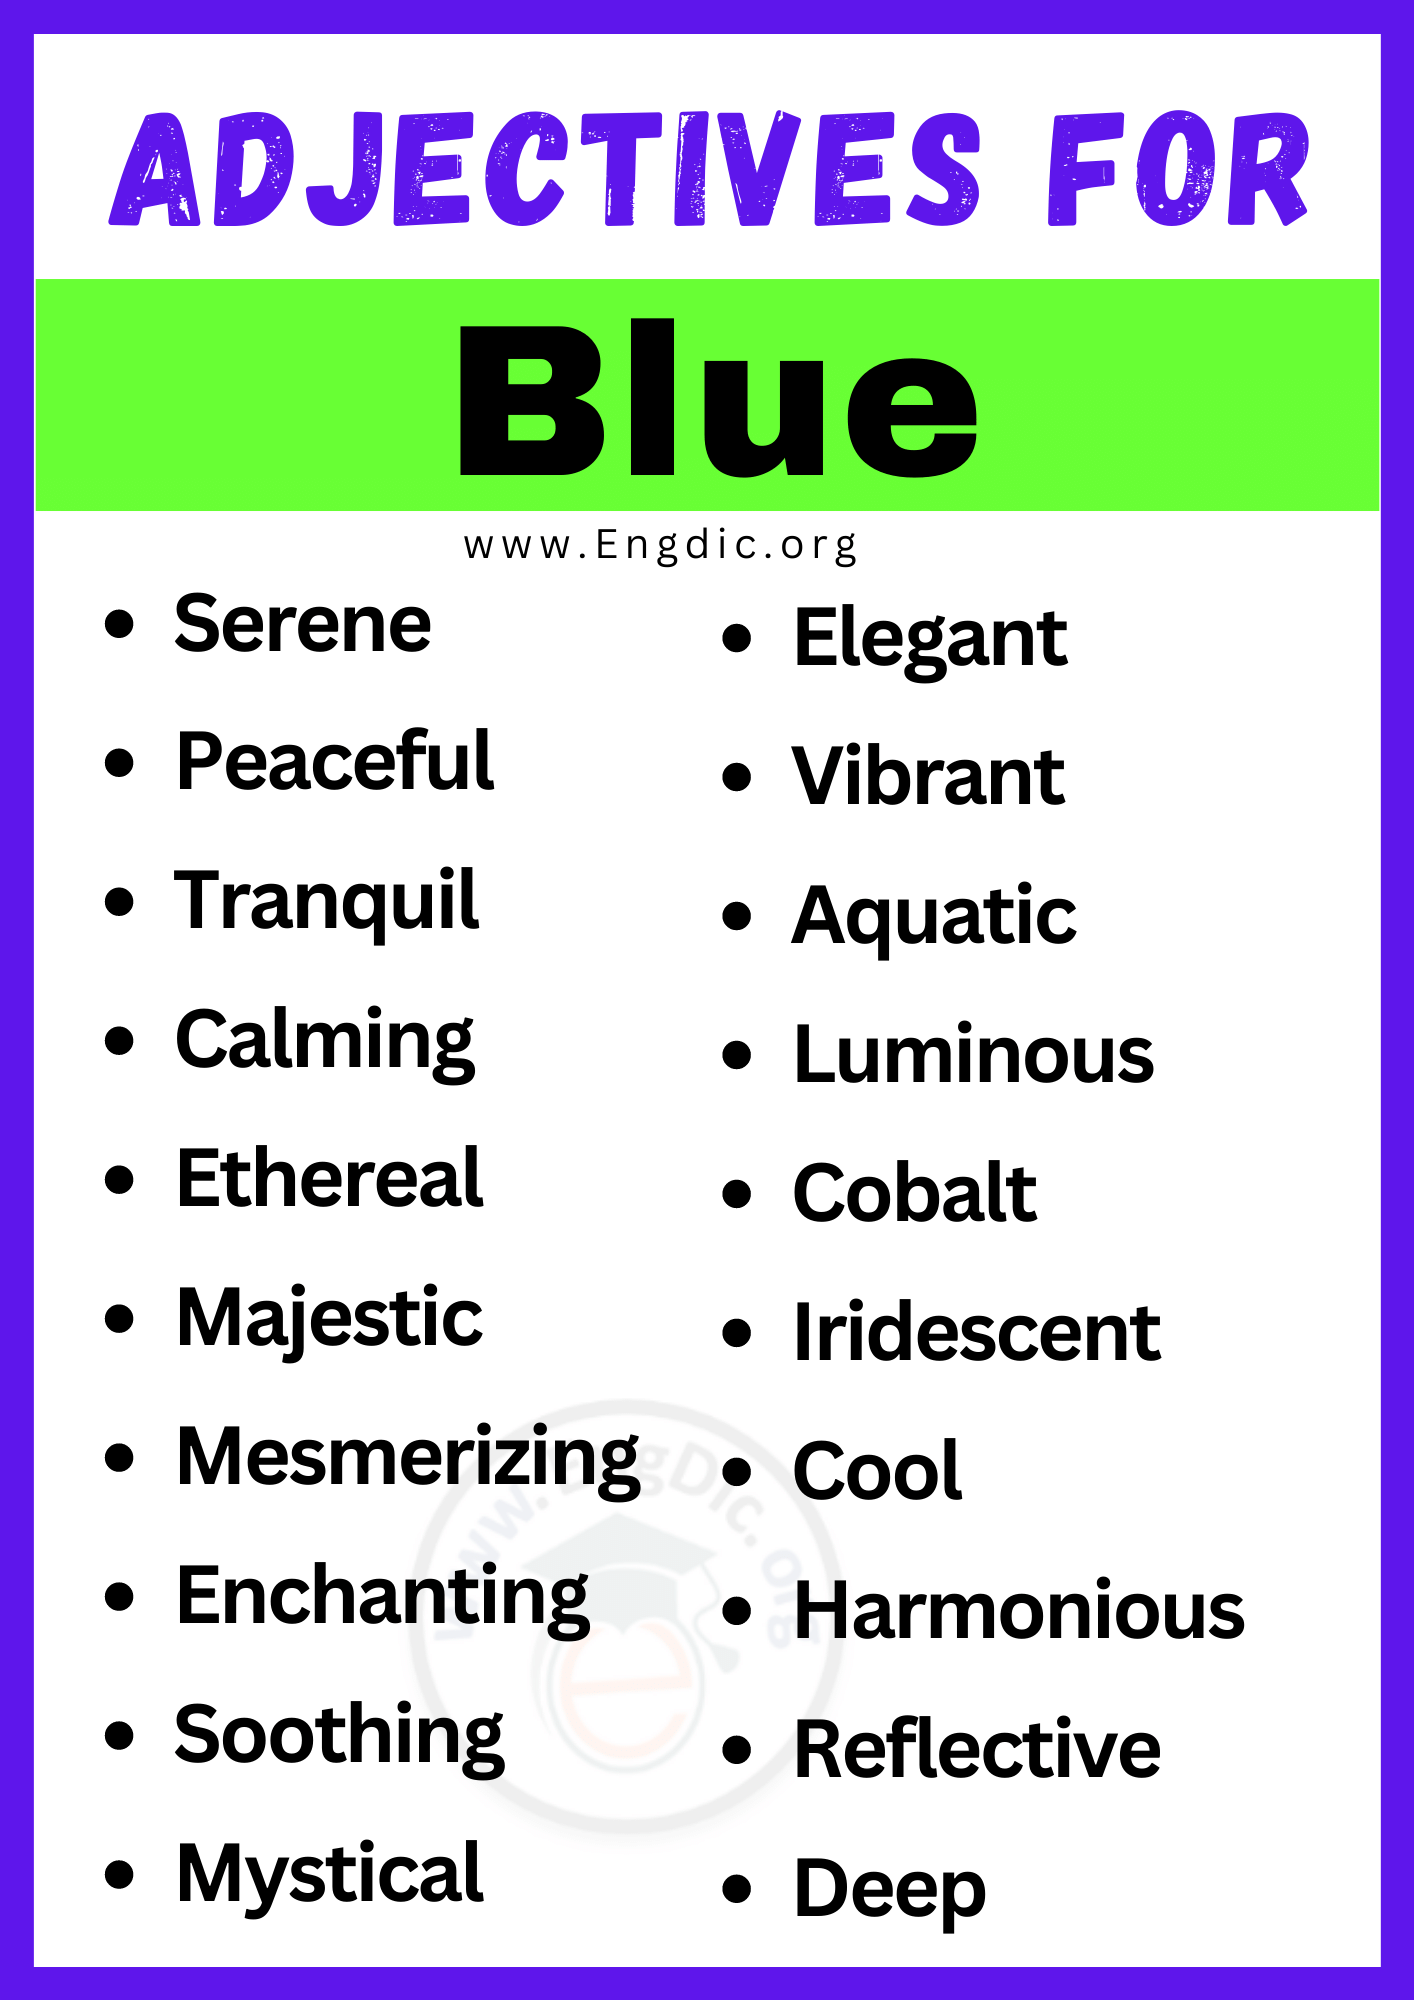 Adjectives for Blue